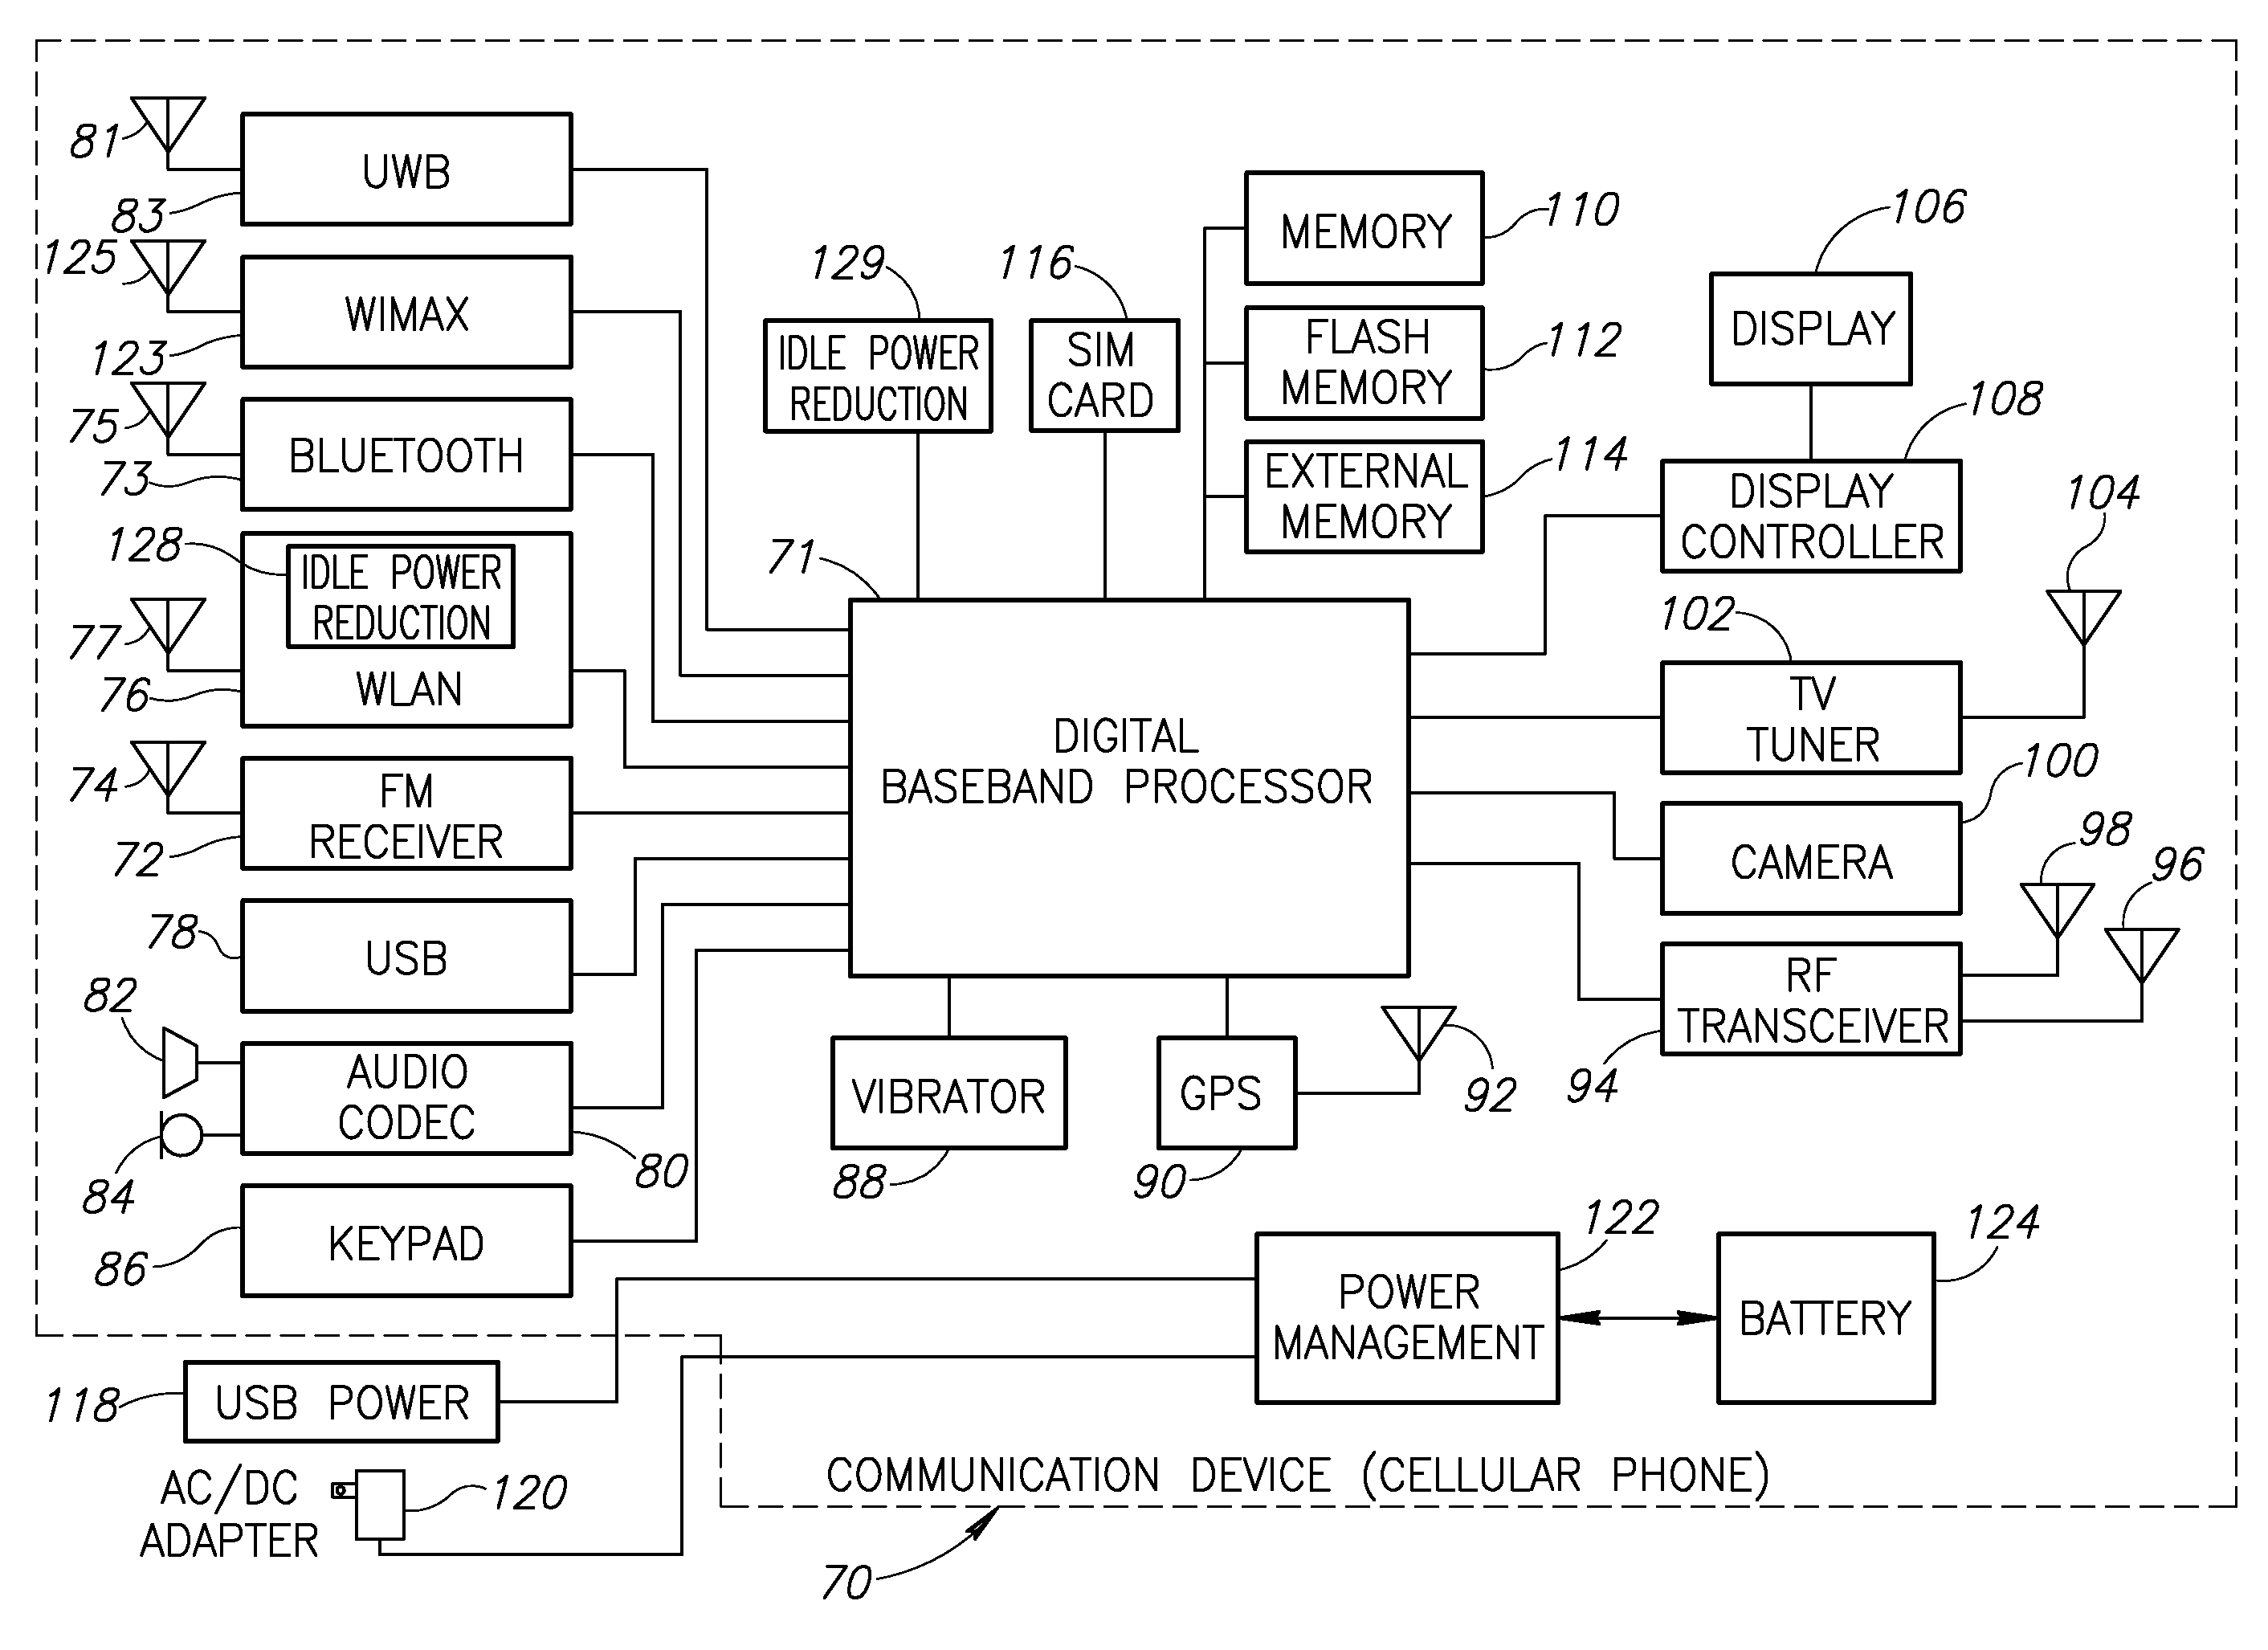 Idle connection state power consumption reduction in a wireless local area network using variable beacon data advertisement